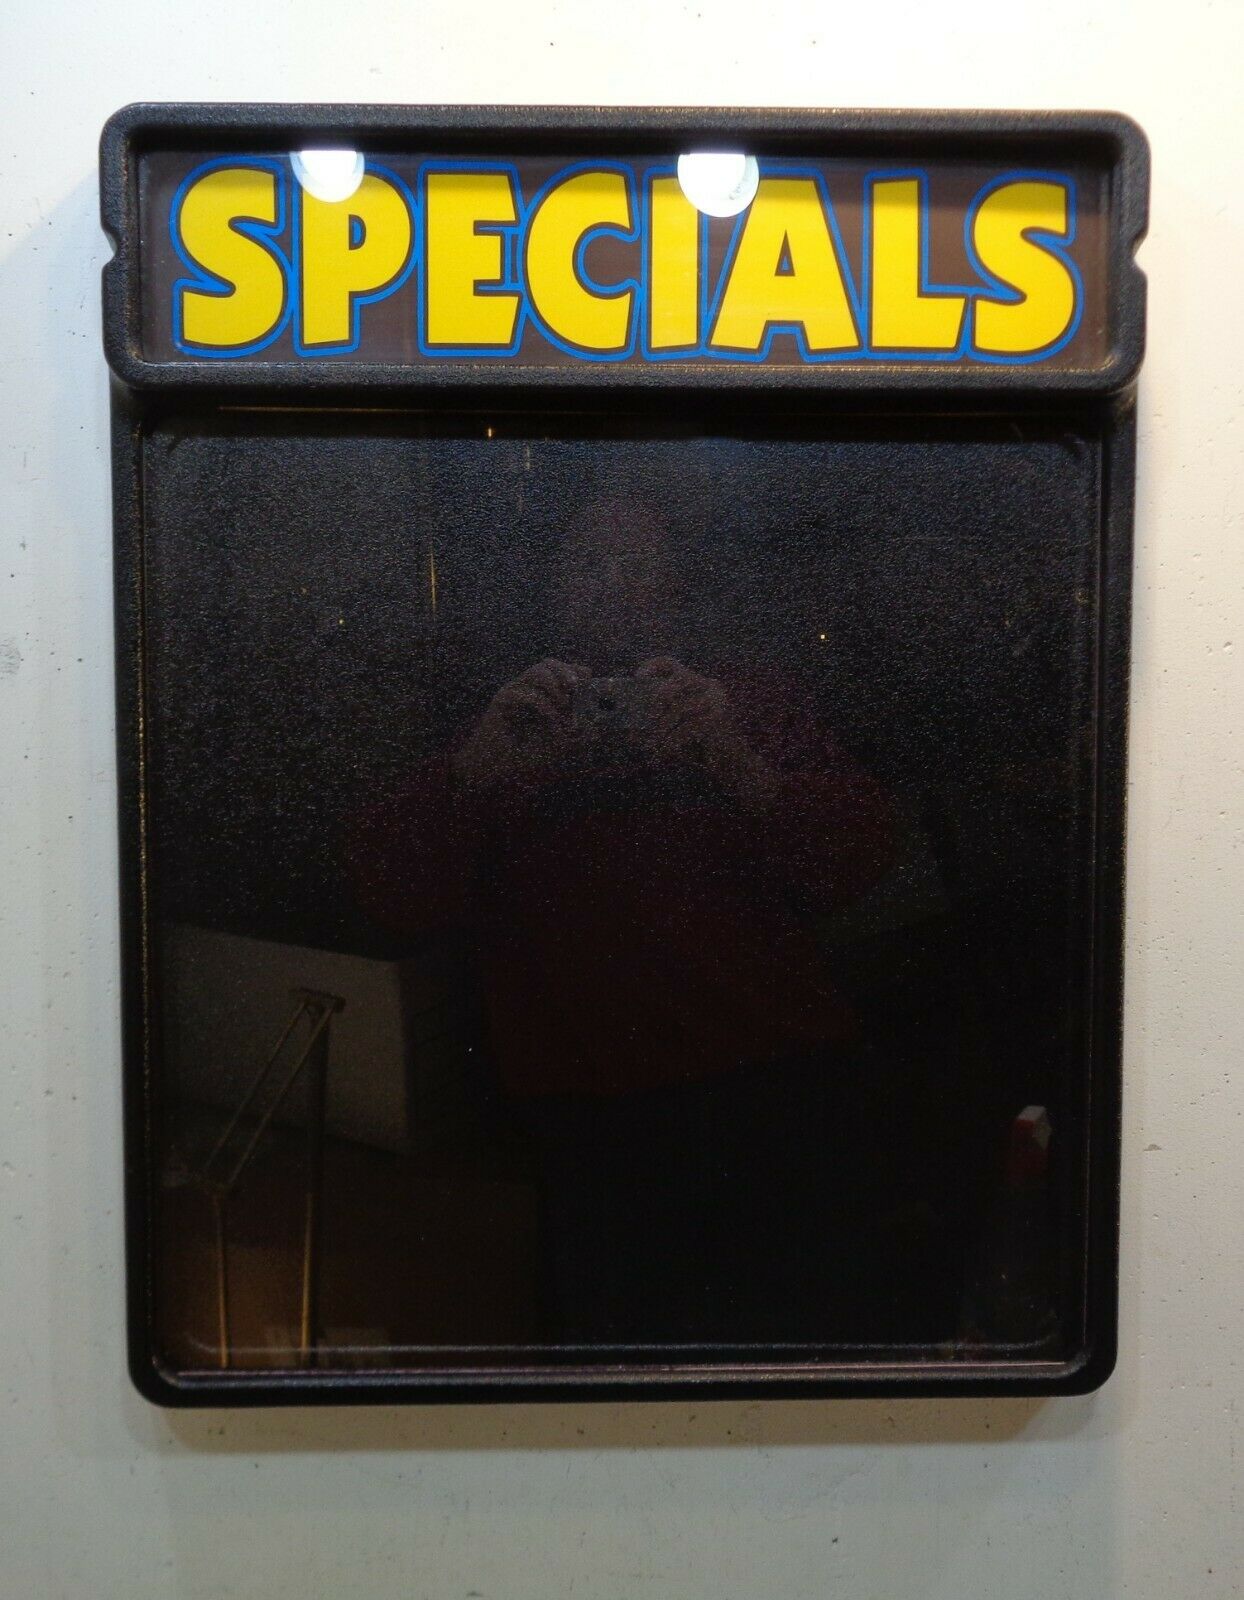 Nice 20" X 25" X 3" Lighted "specials" Wall Mount Menu Sign Board Working